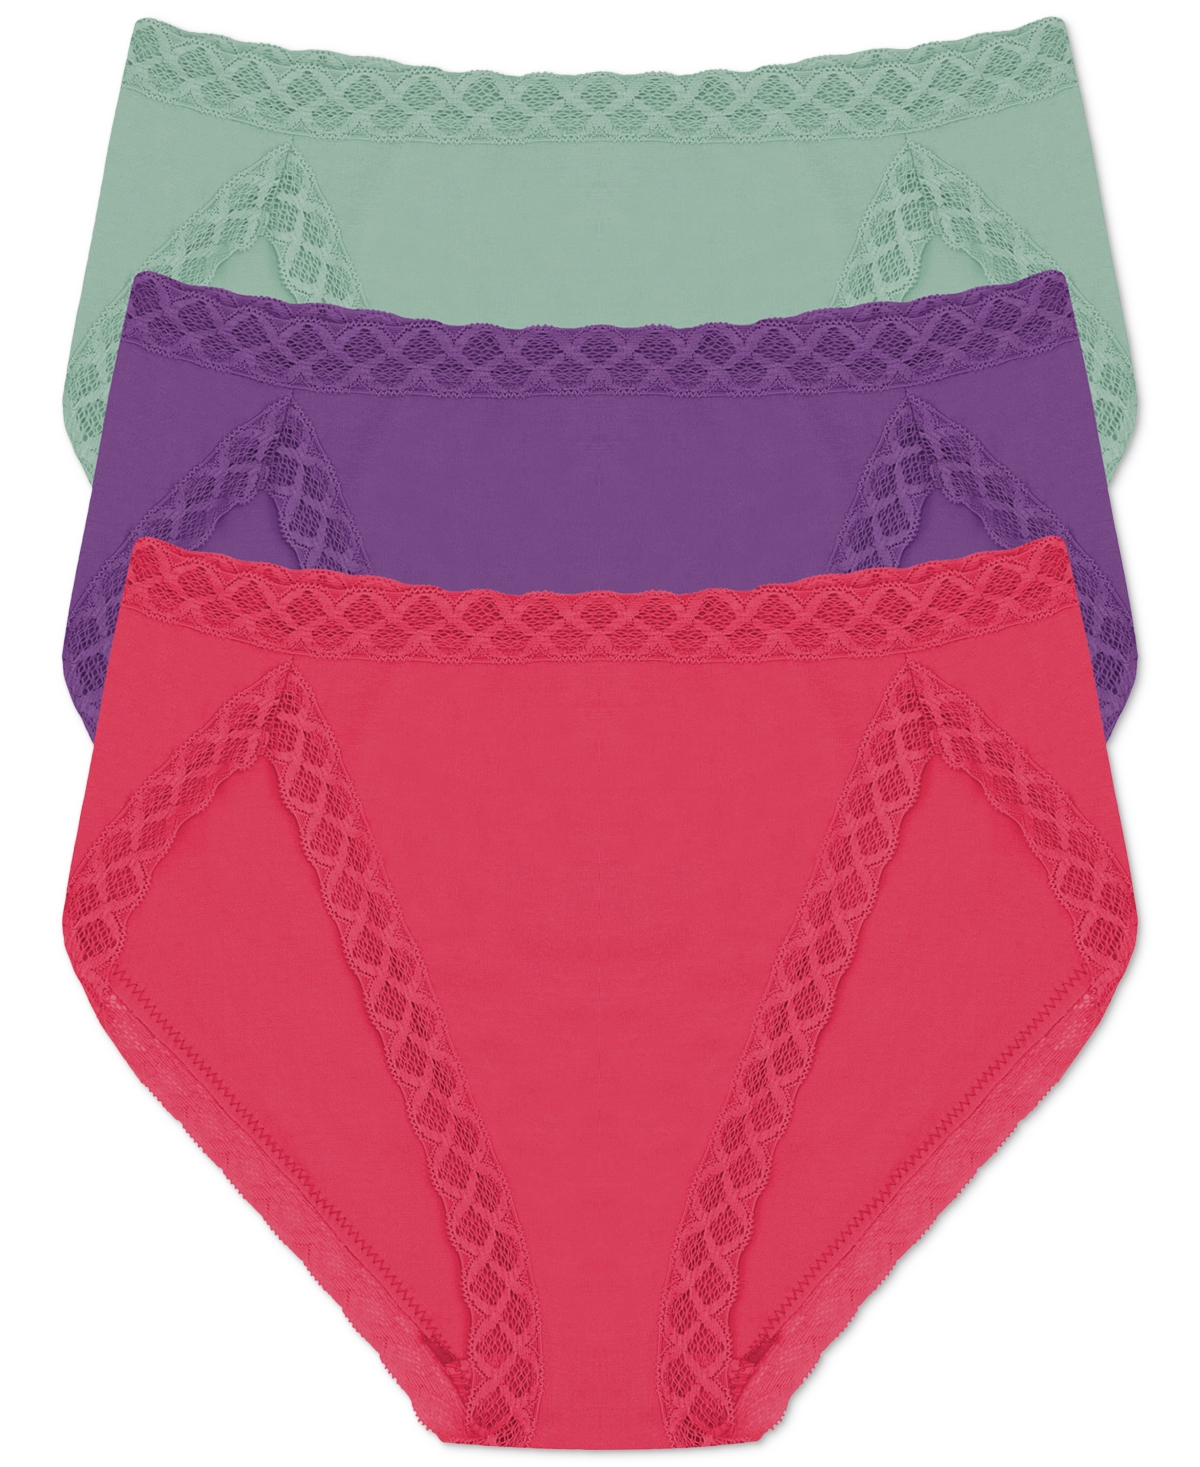 NATORI BLISS FRENCH CUT 3-PACK BRIEF 152058MP